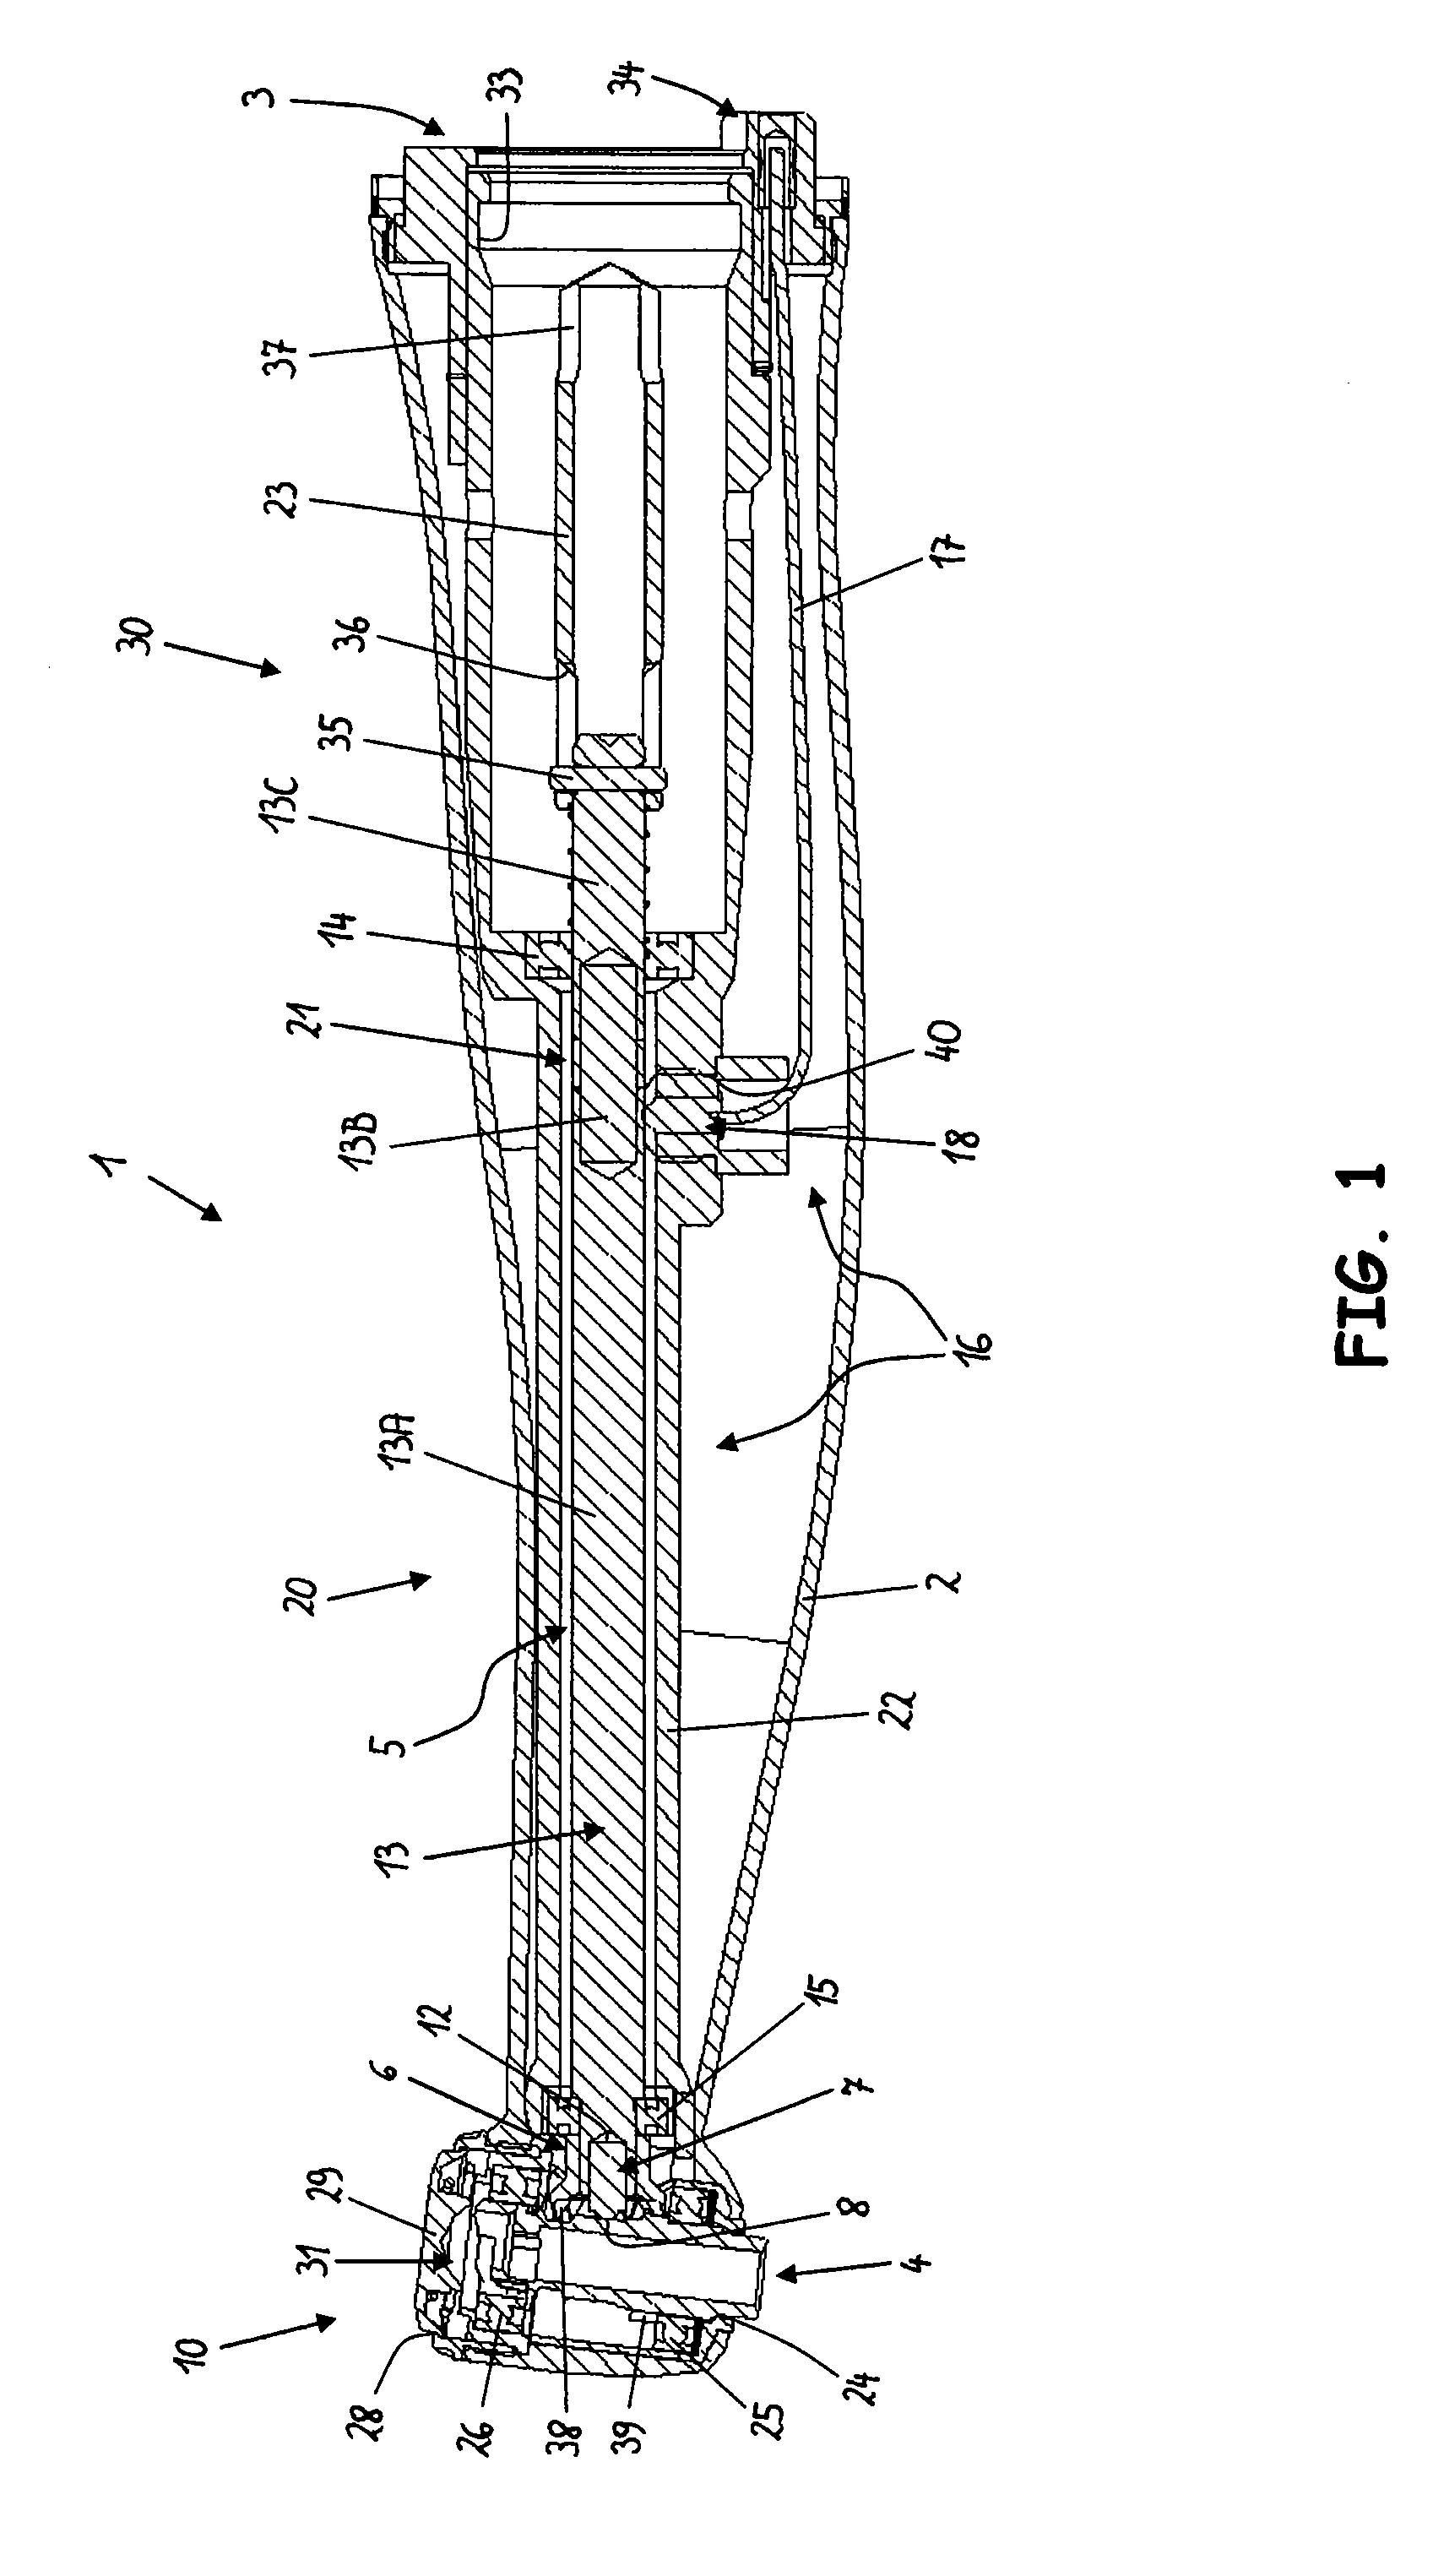 Dental handpiece for root canal treatment and method